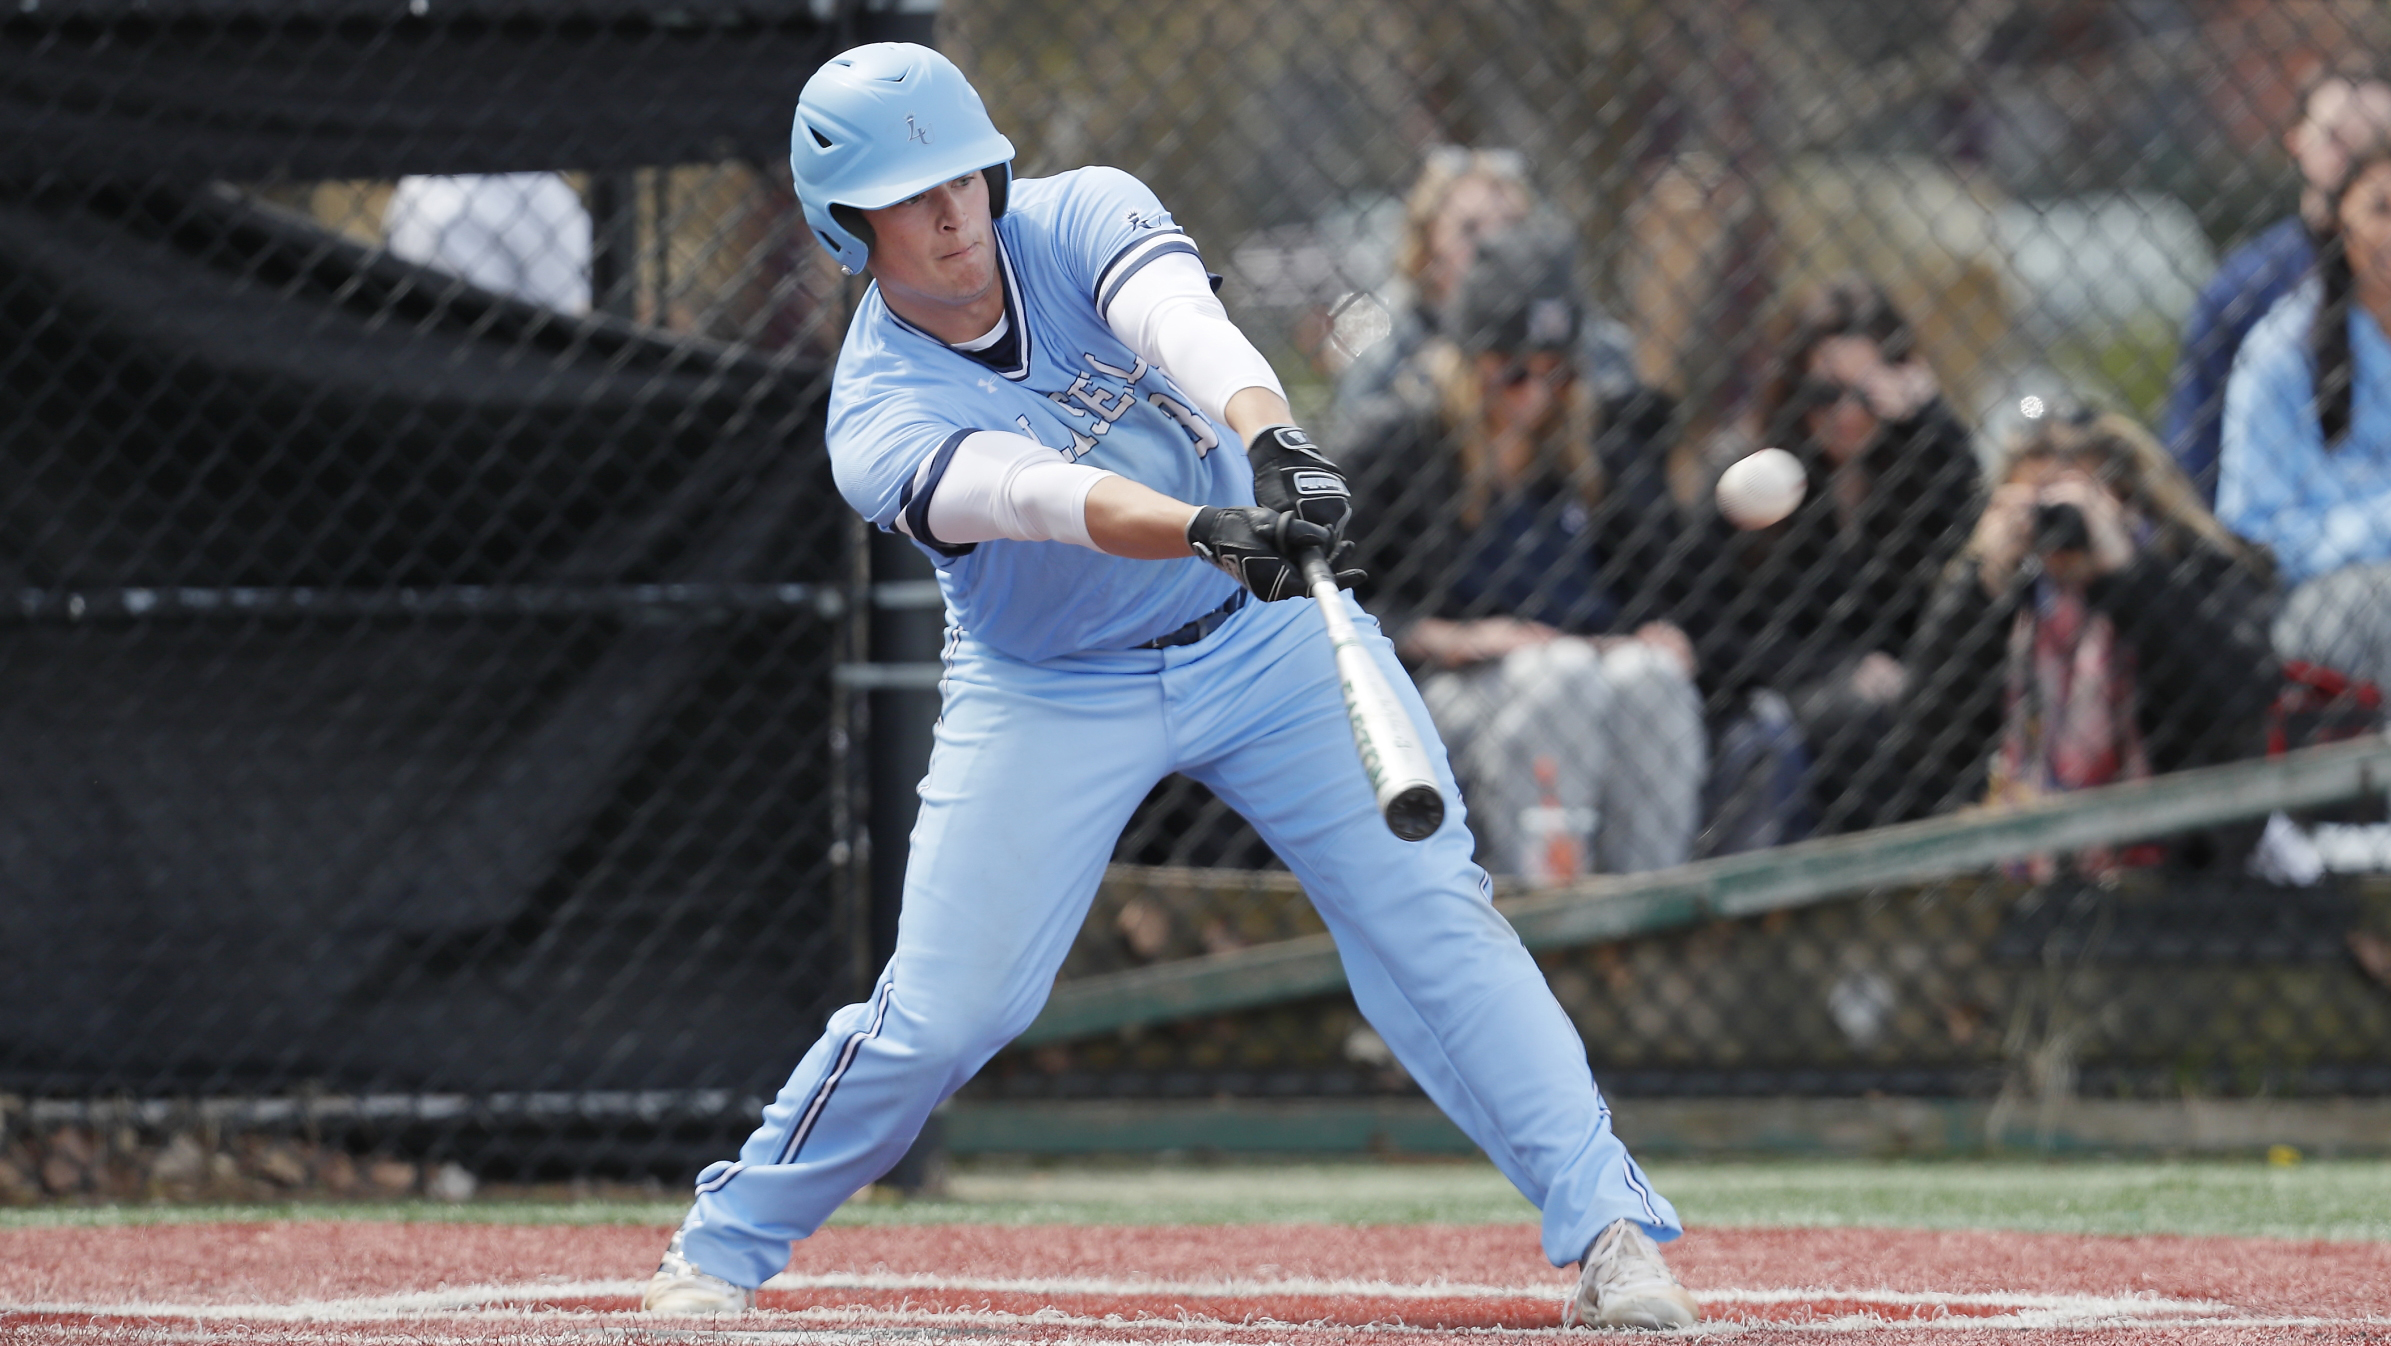 Baseball: Paharik's big game leads Lasell to doubleheader split with Dean